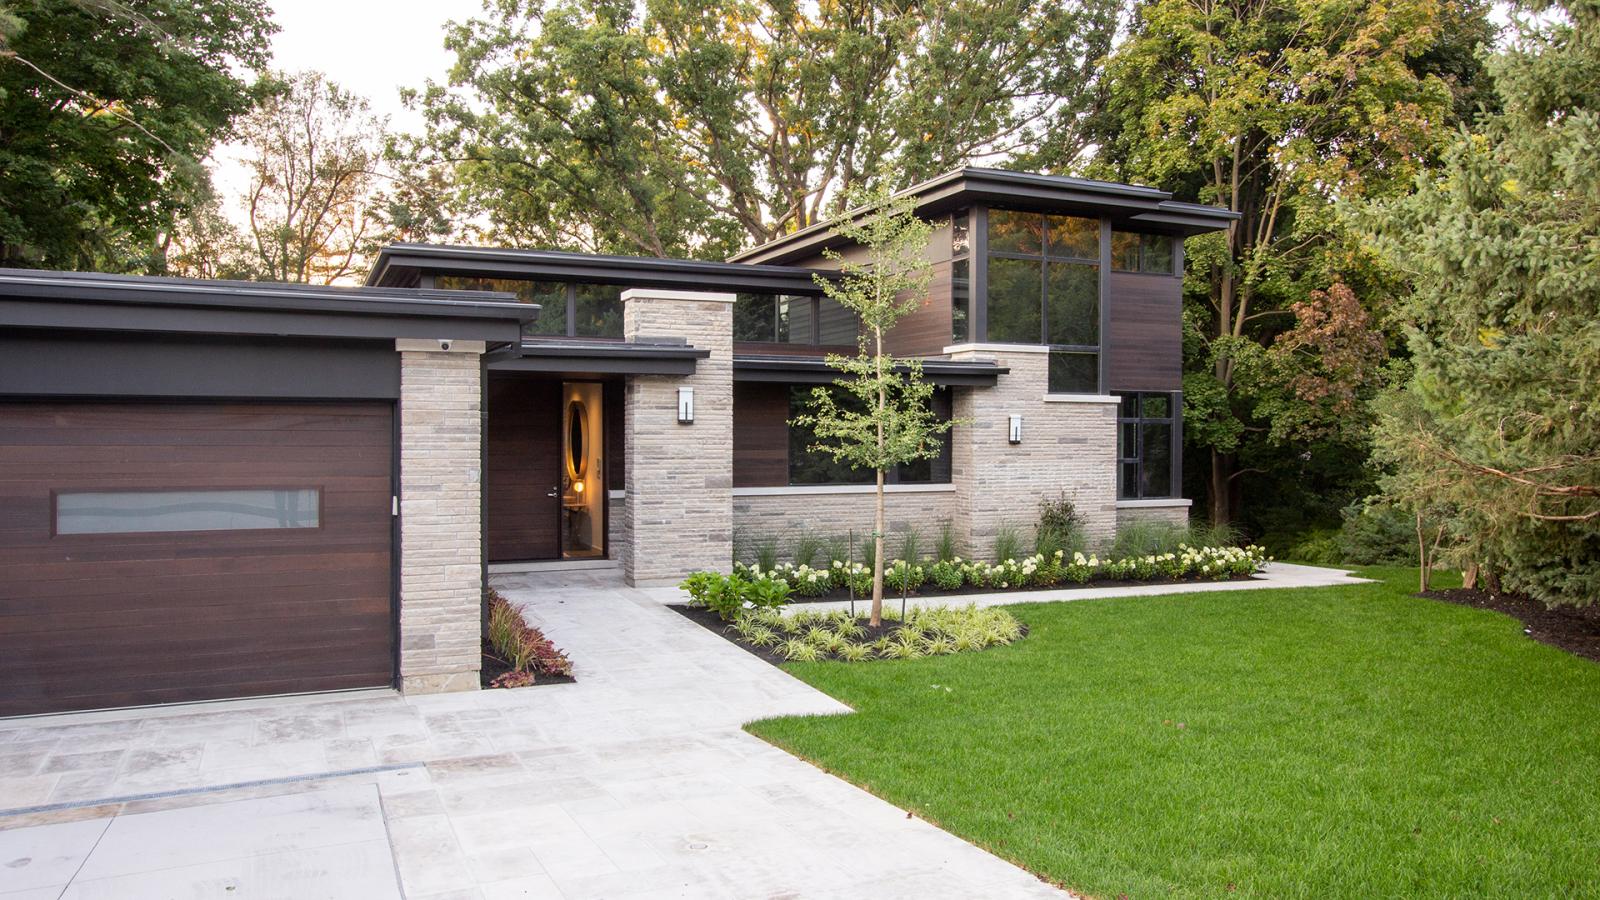 Modern bungalow with natural stone, flat roof and black frame windows.